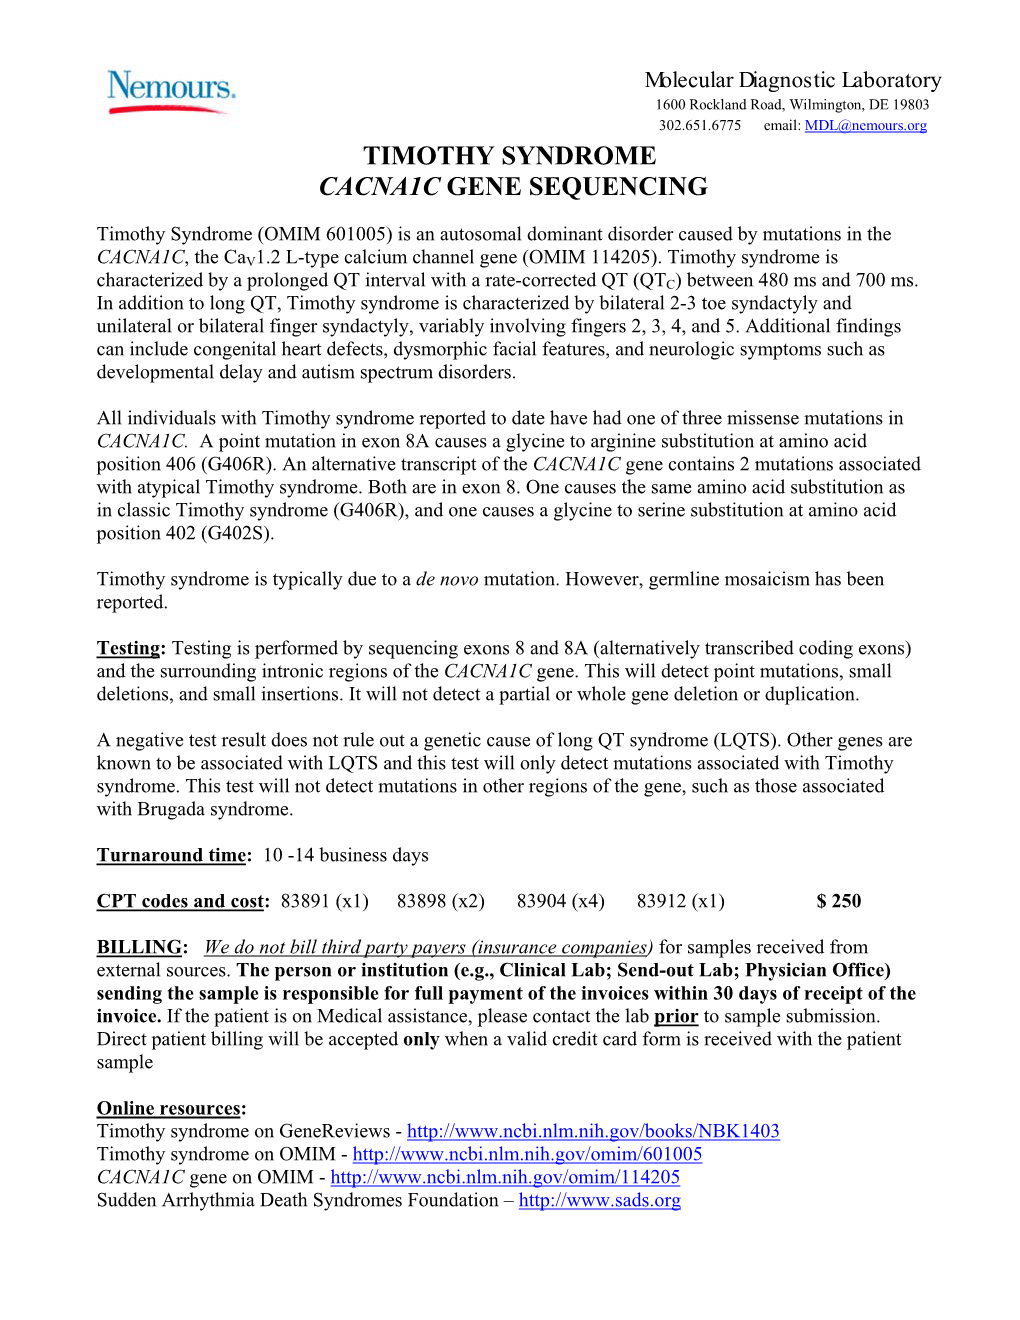 Timothy Syndrome Cacna1c Gene Sequencing